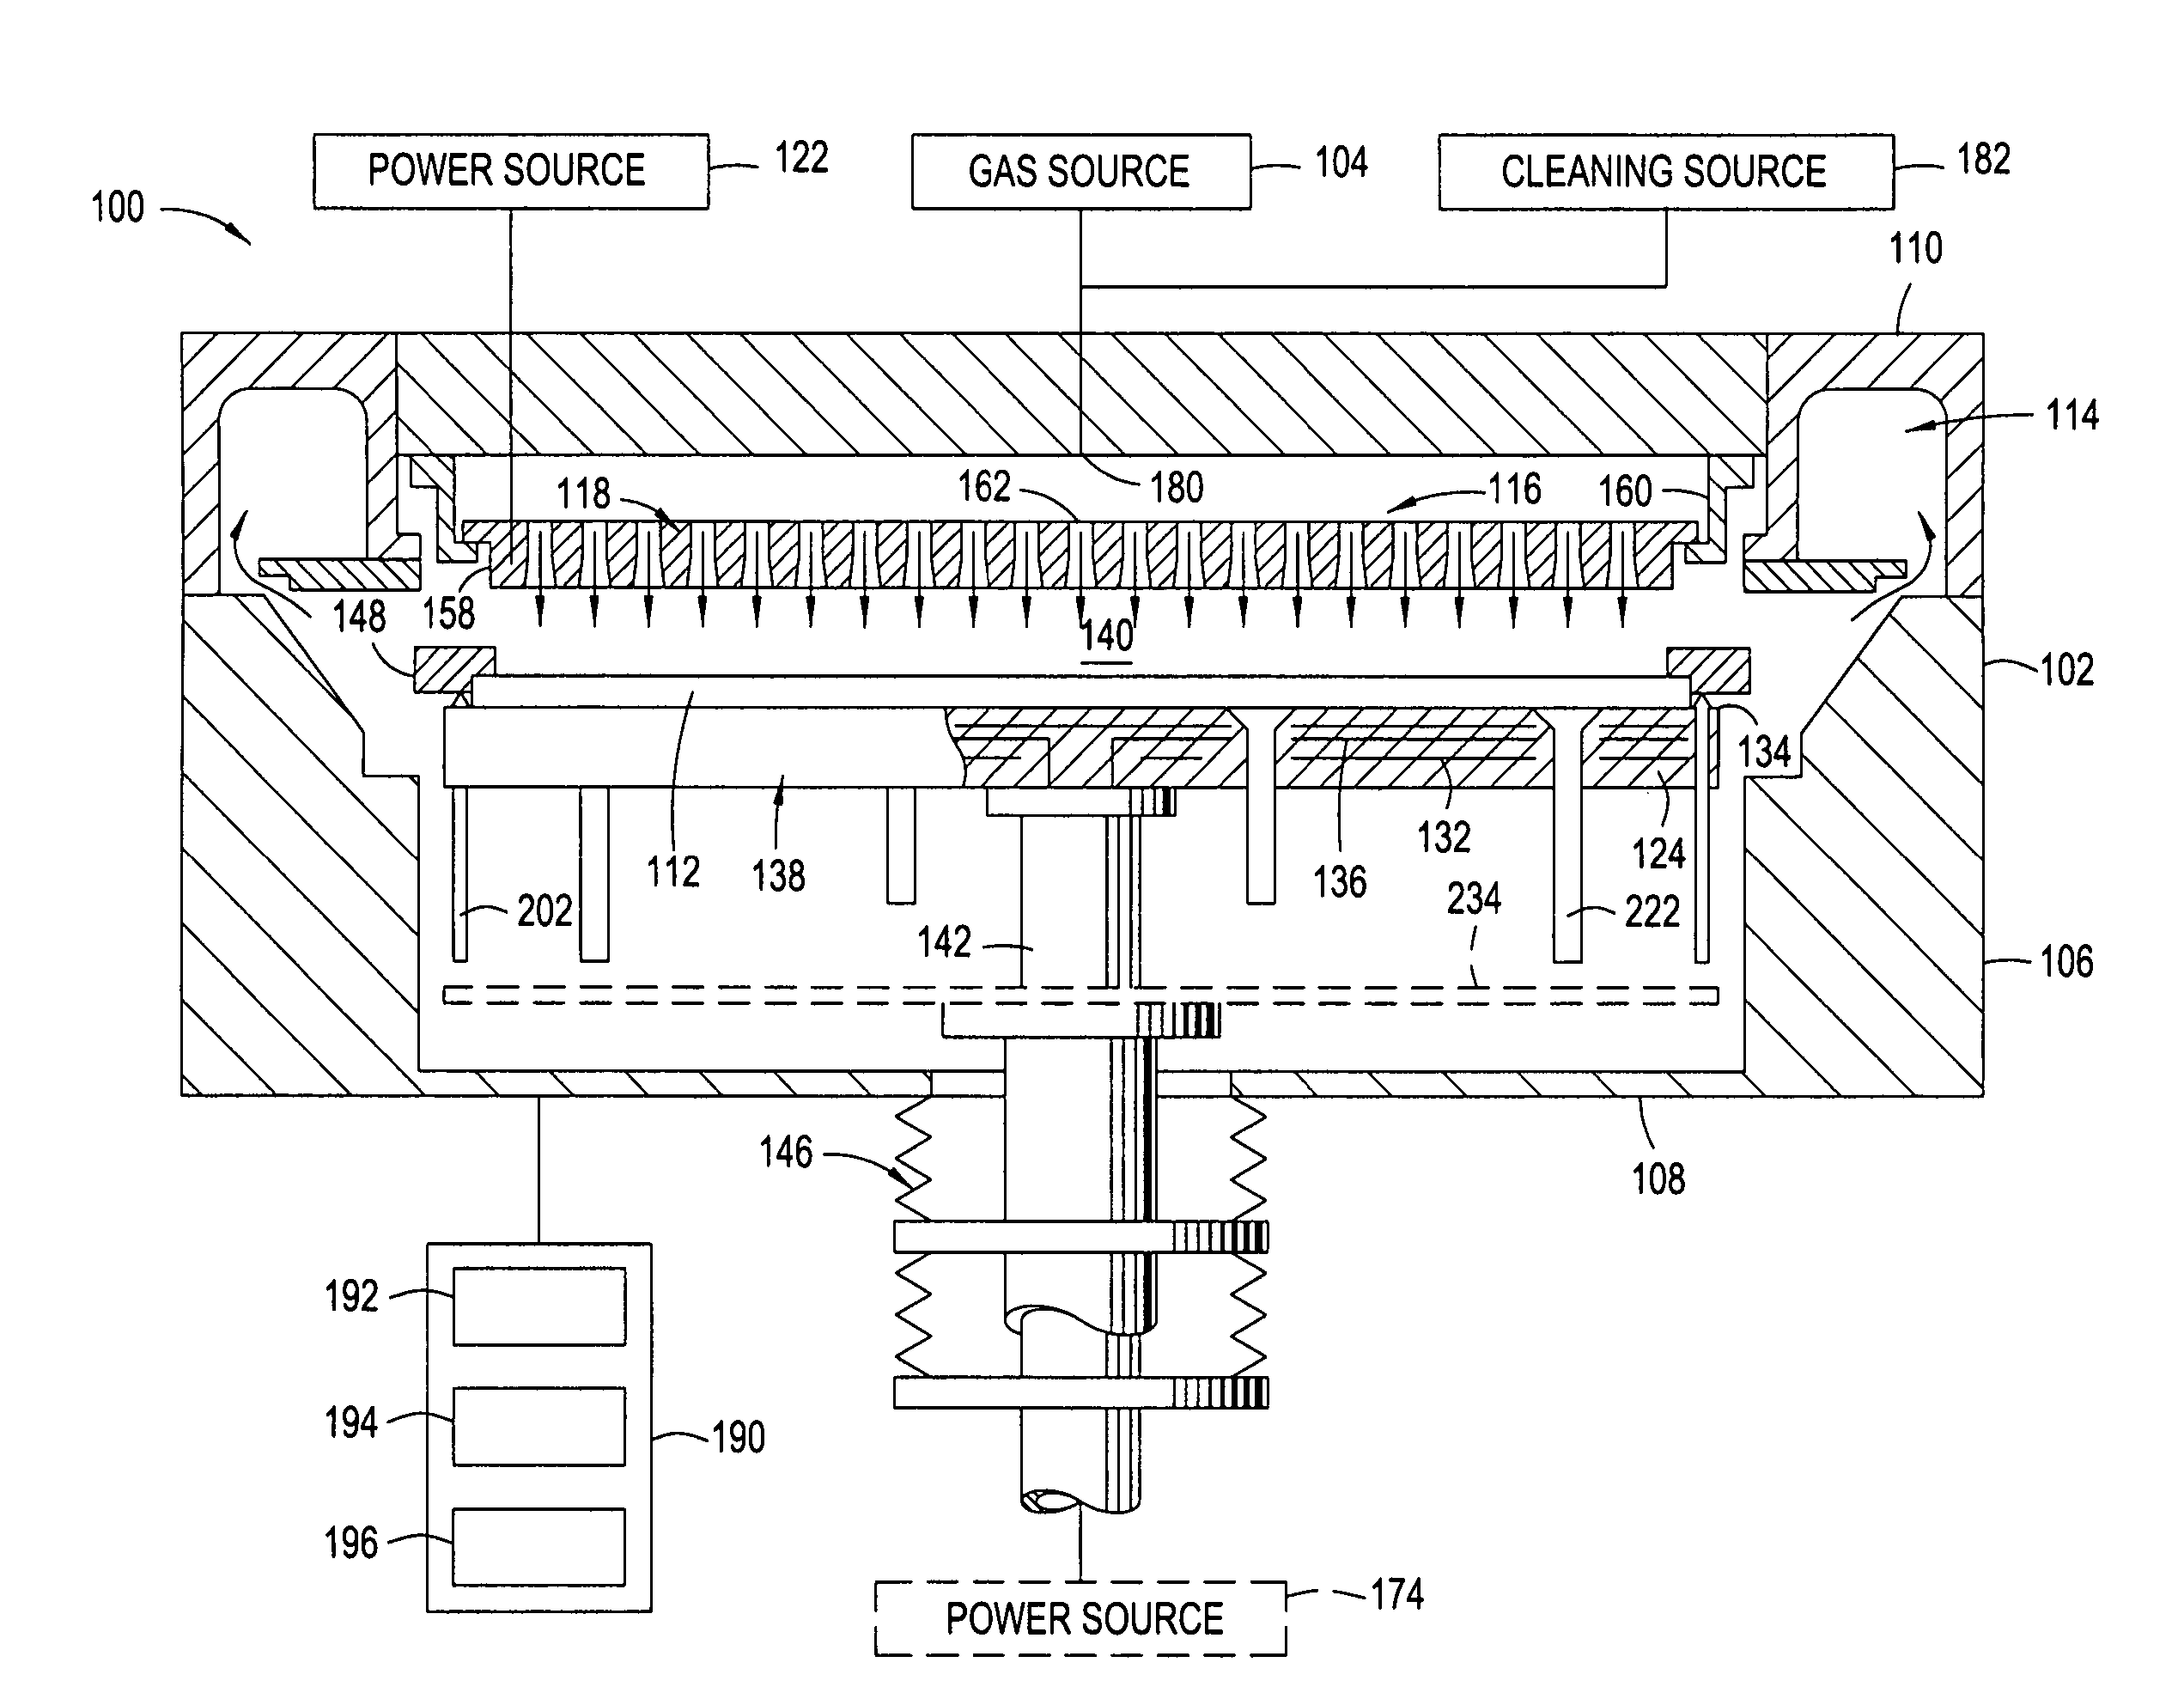 Active cooling substrate support